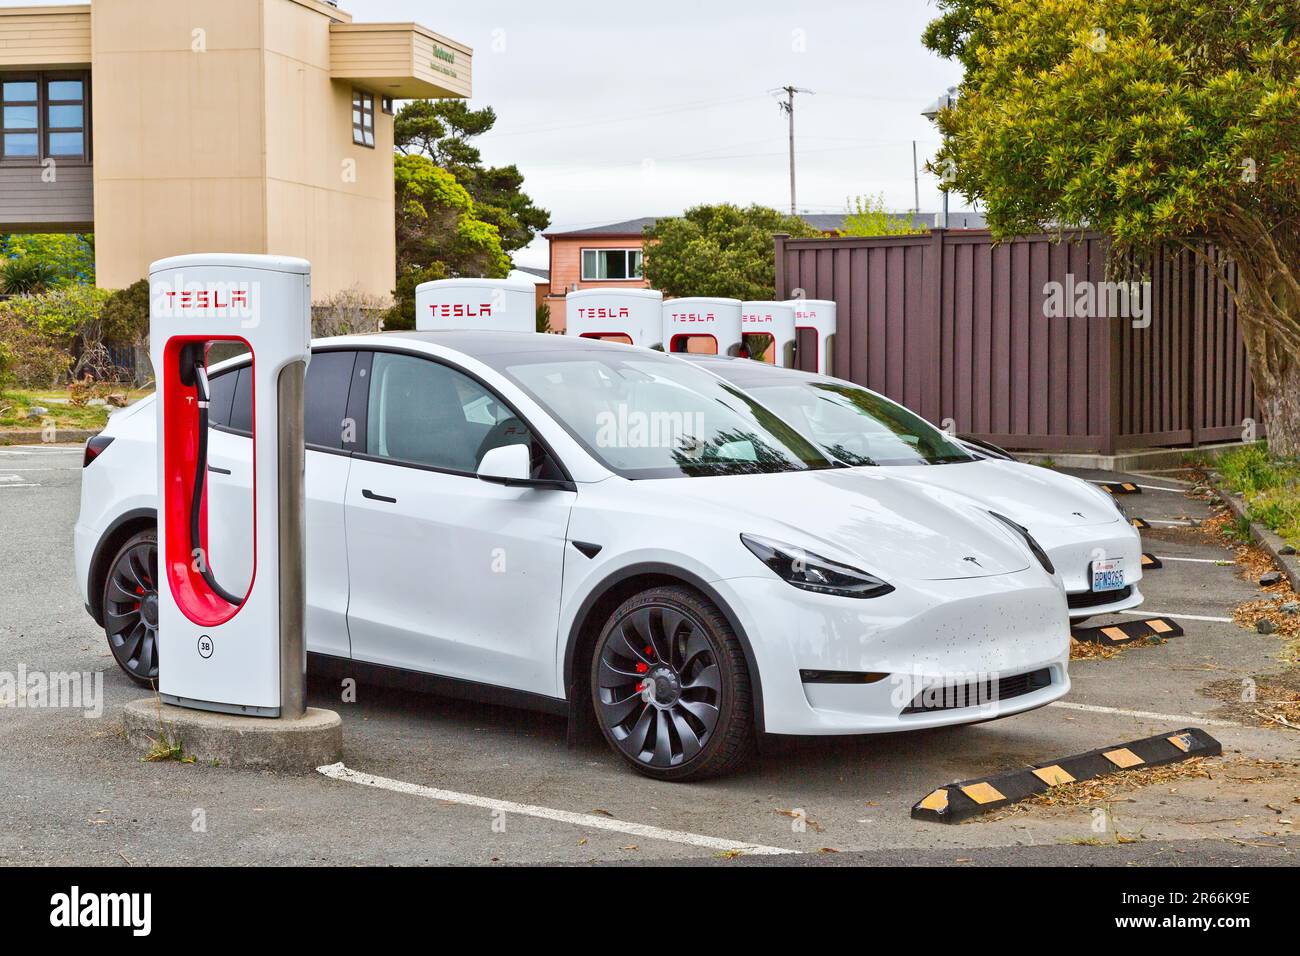 Tesla Supercharger Stations, converts 480V AC to 360V DC for the 'S' model, California West Coast. Stock Photo